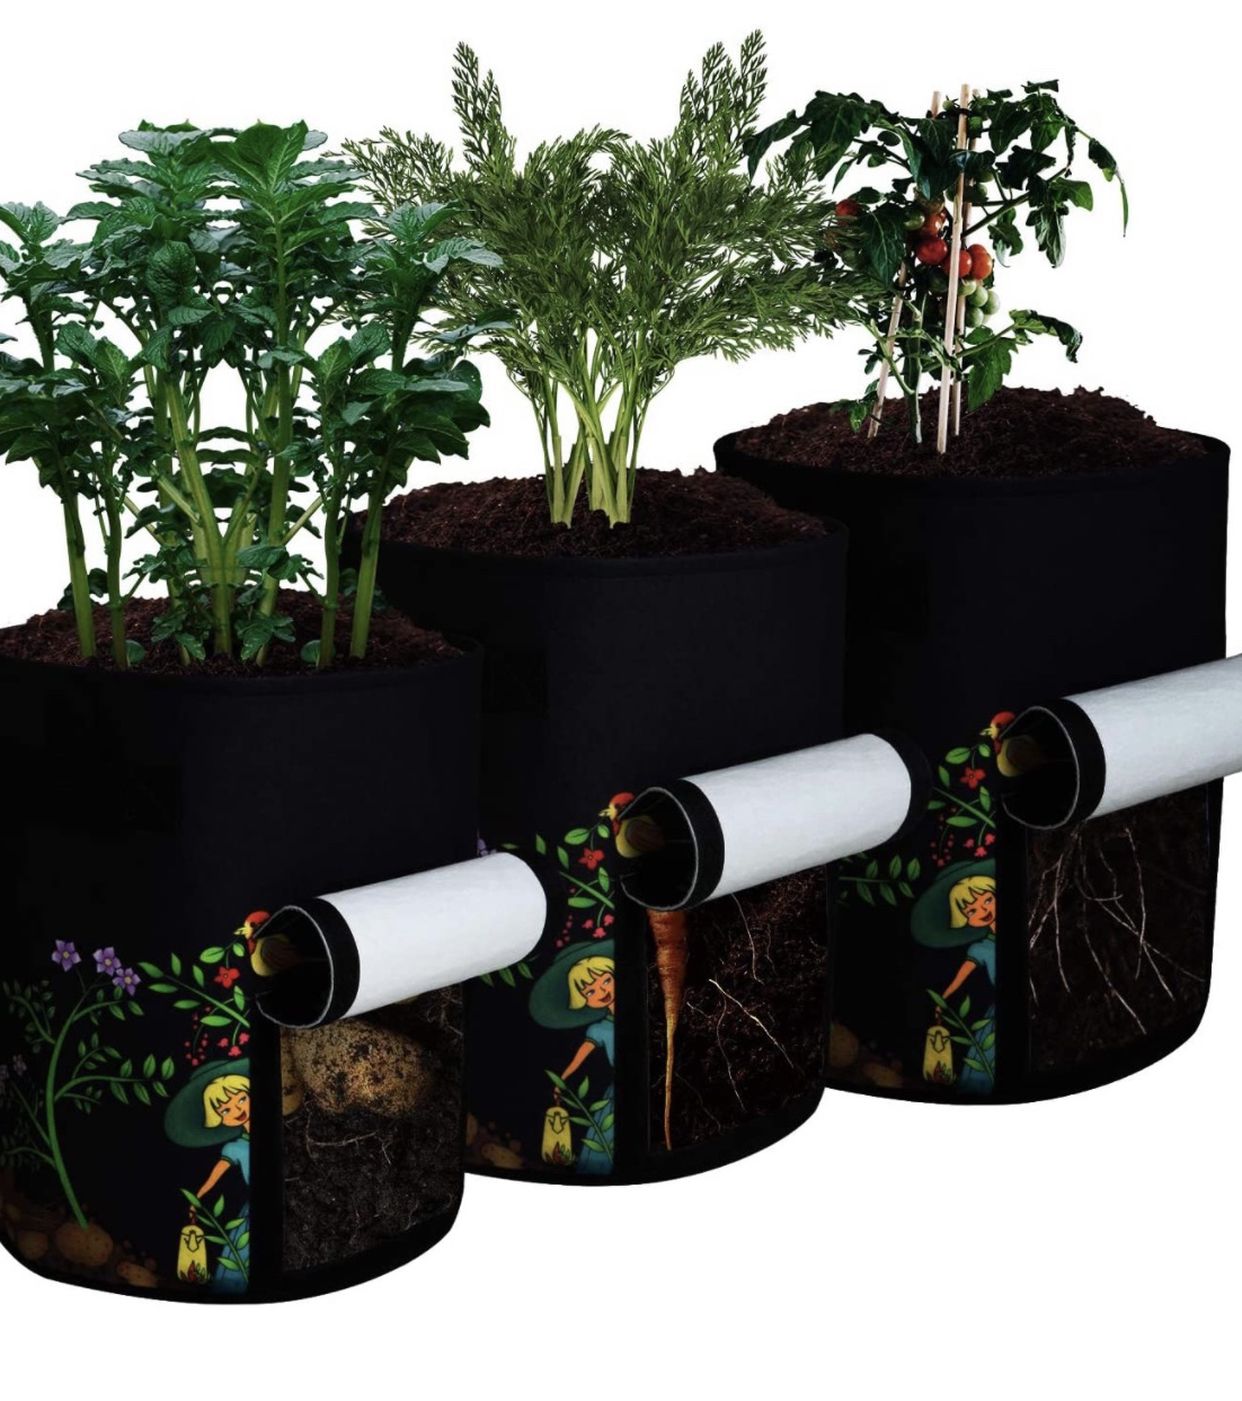 3-Pack 5 Gallon Plant Grow Bags, Visualization Window Thickened